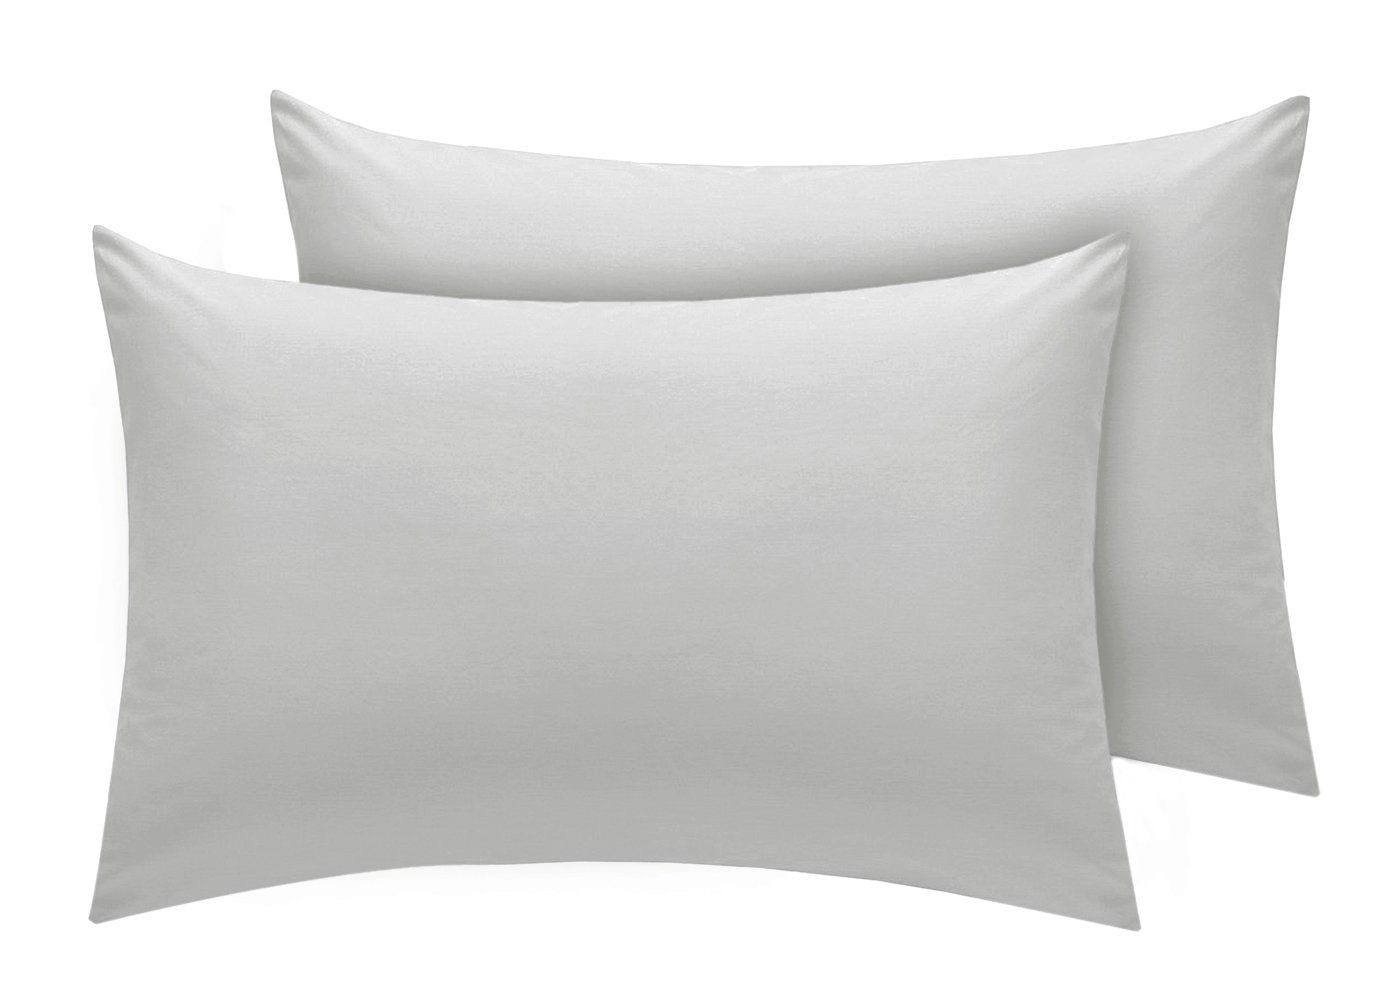 Indus Textiles Percale Pair Of Housewife Pillowcases - Light Grey